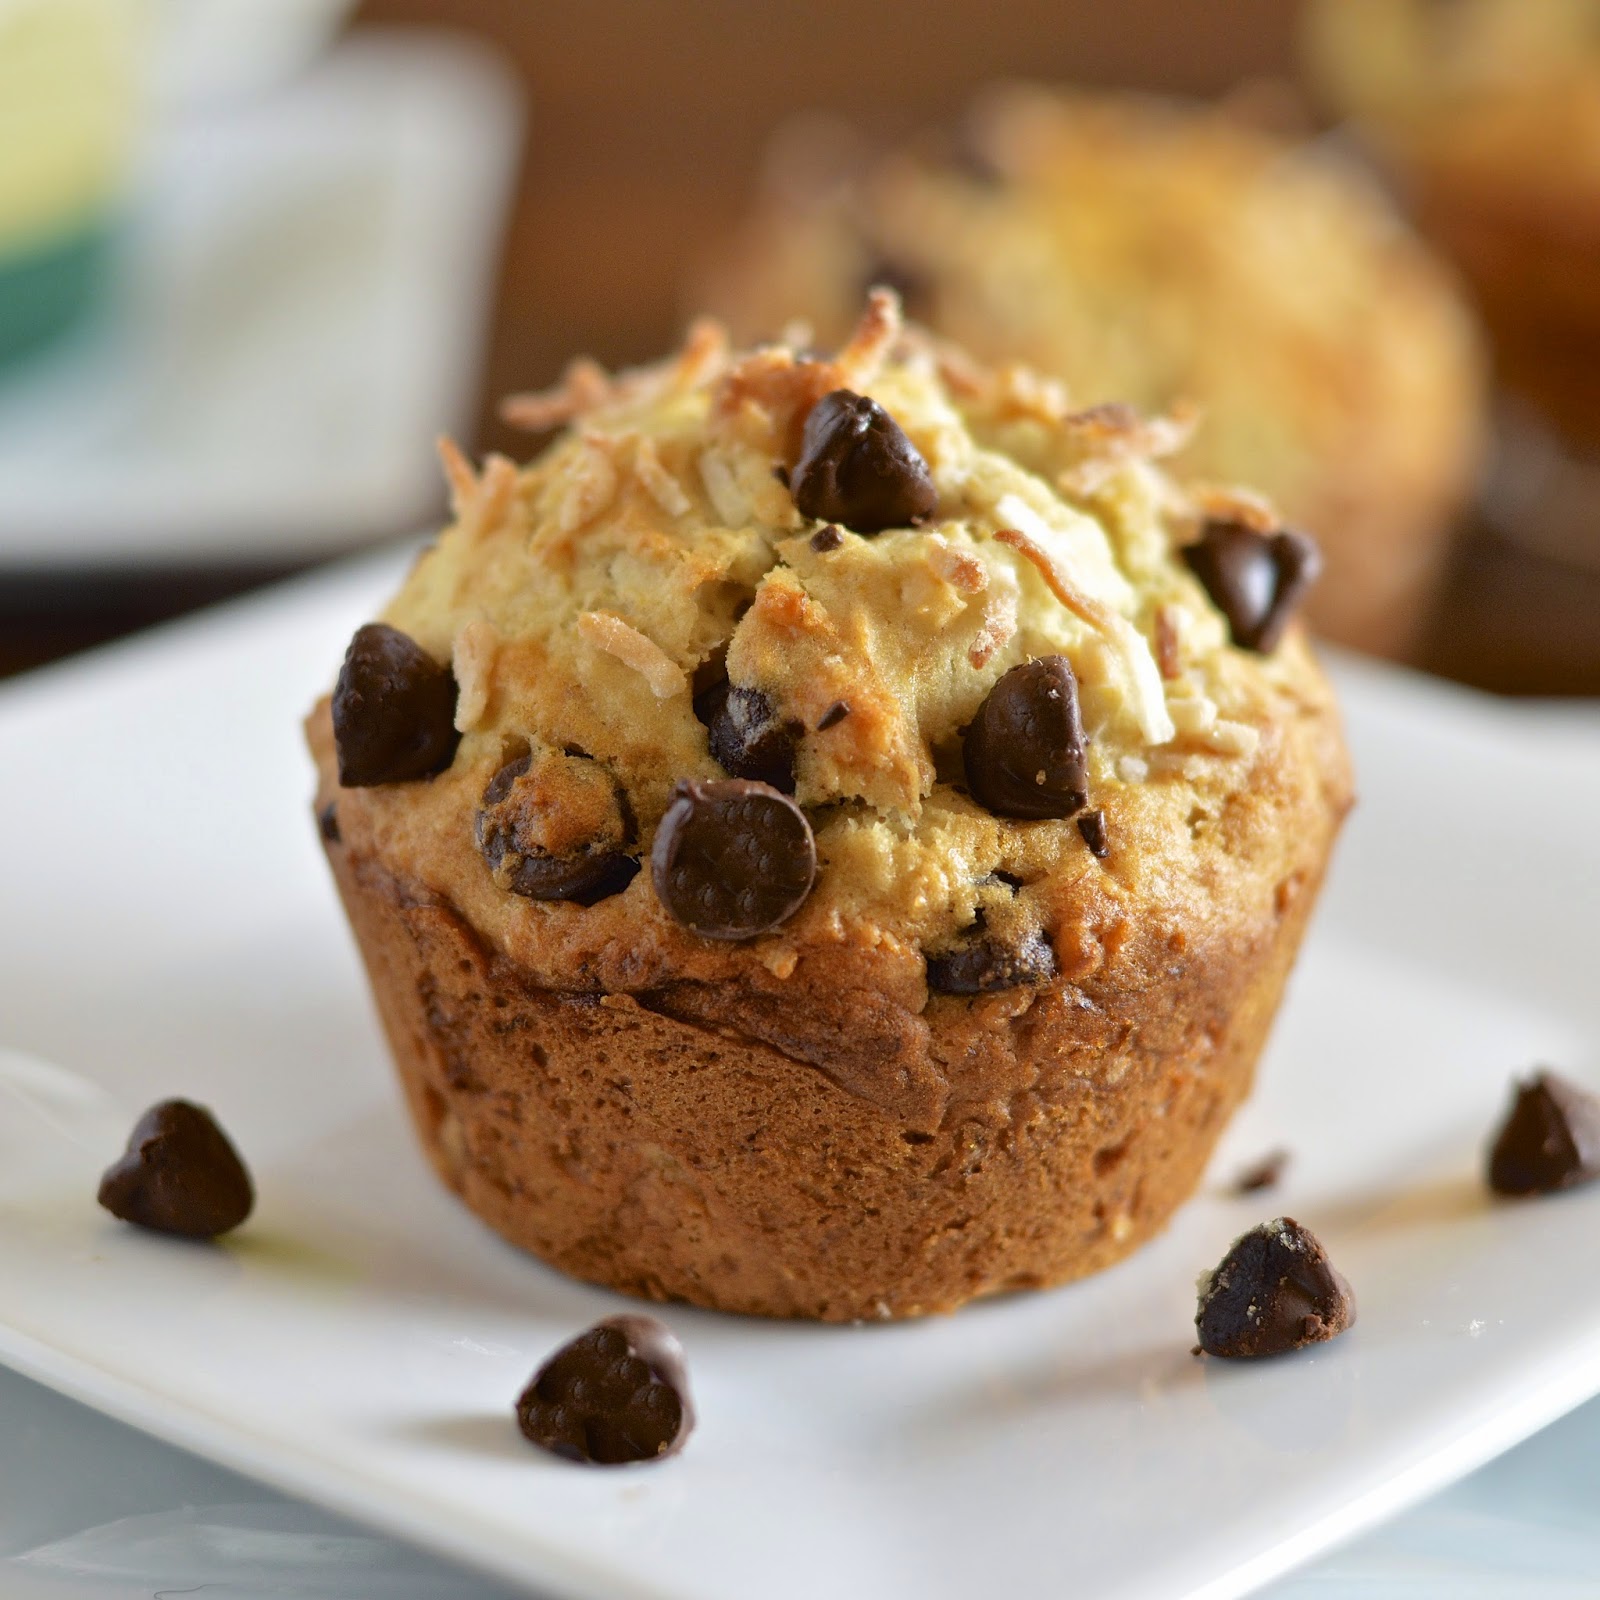 These banana coconut chocolate muffins will sweeten your morning and include a gluten free option.